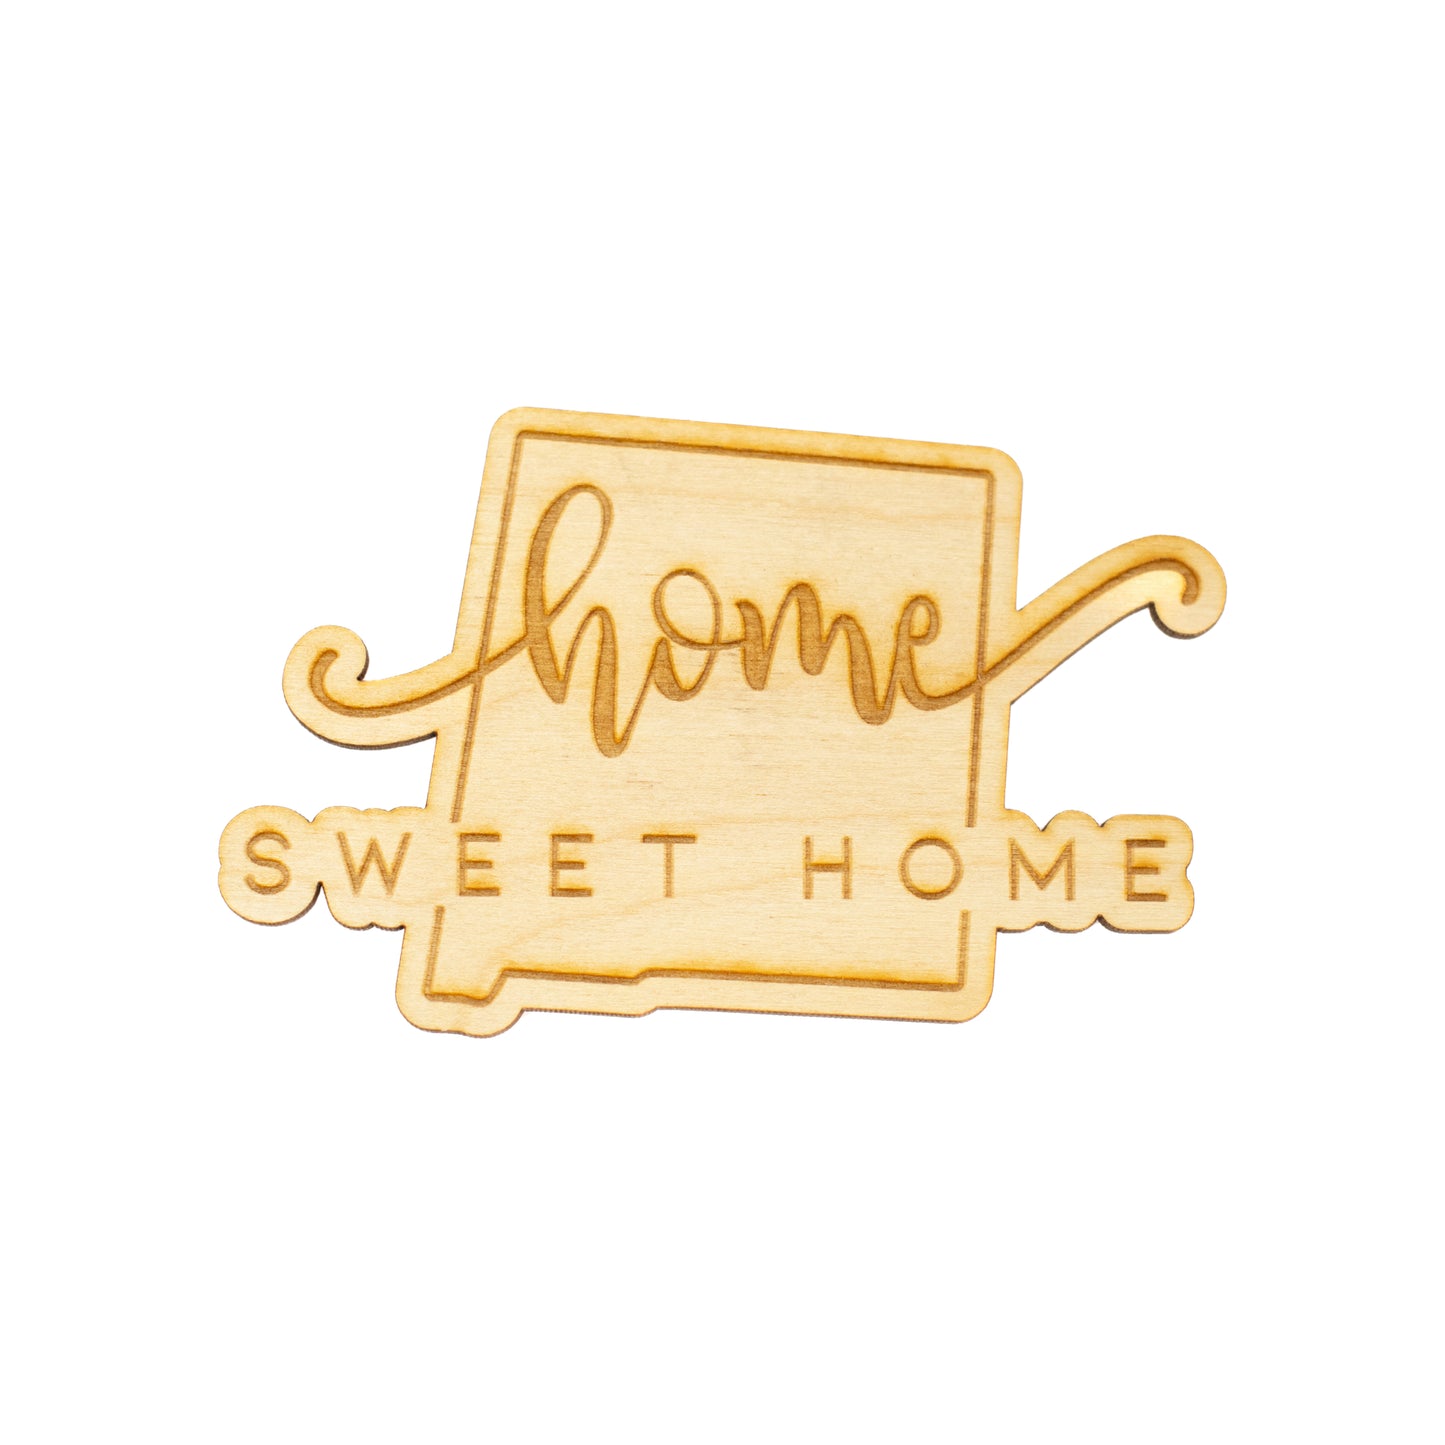 New Mexico Home Sweet Home Magnet